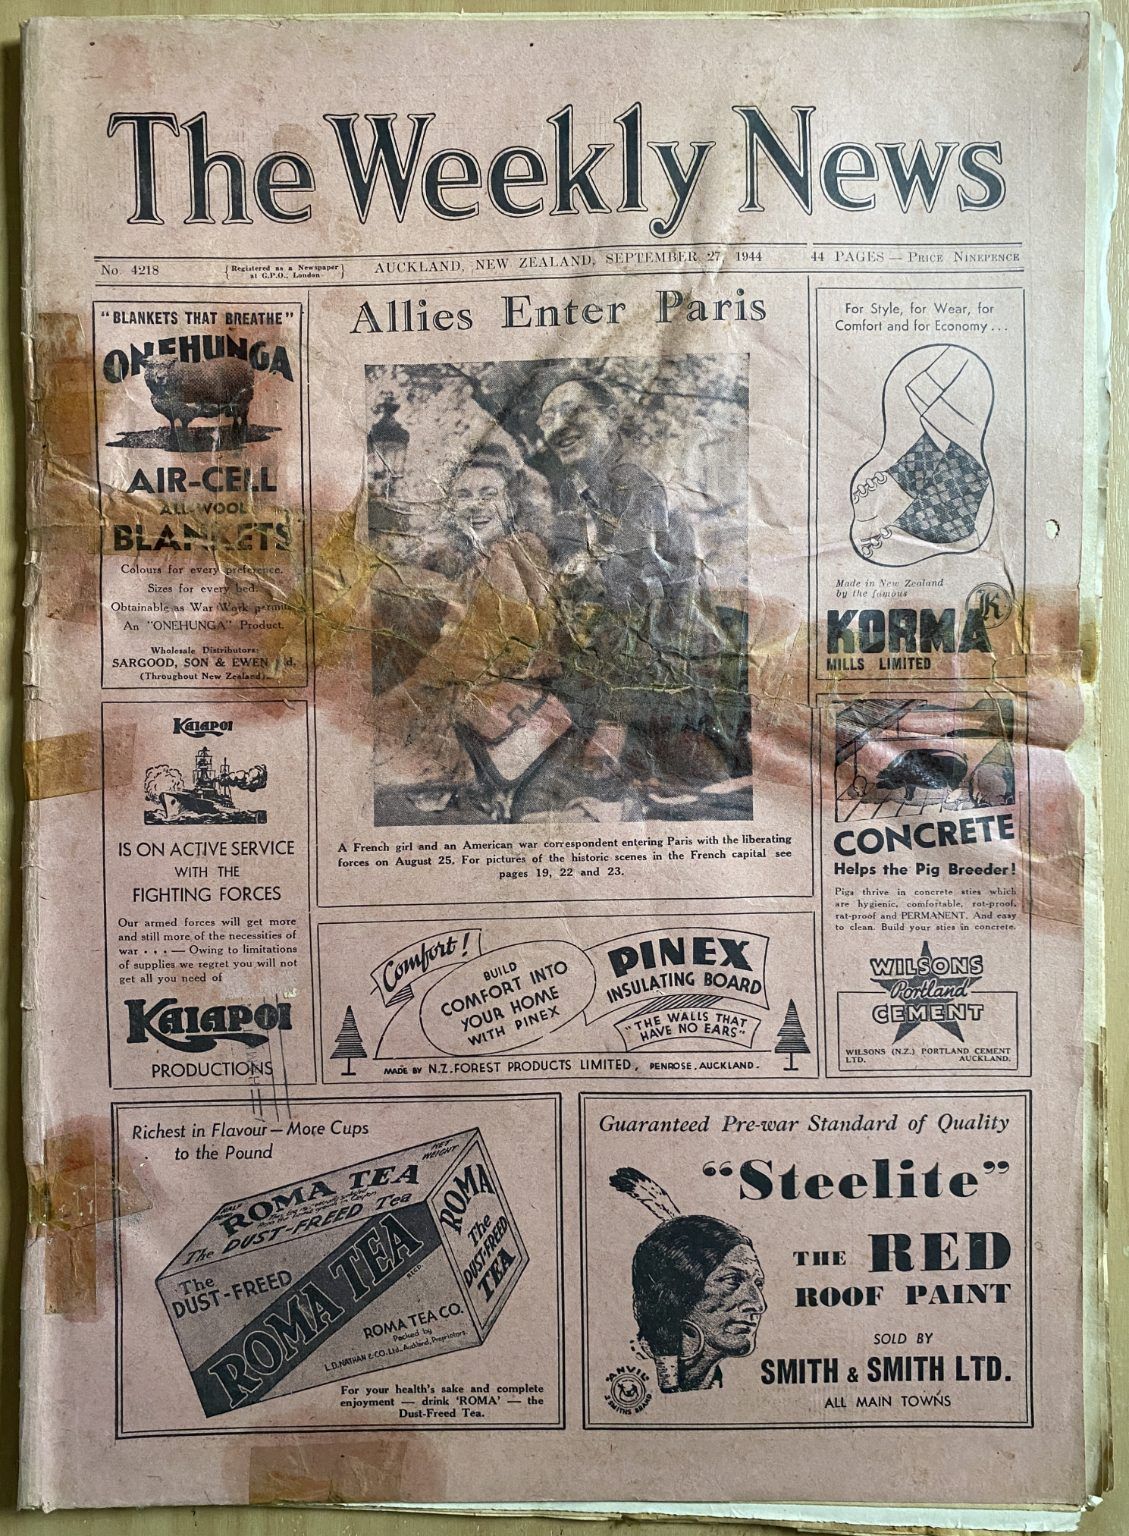 OLD NEWSPAPER: The Weekly News - No. 4218, 27 September 1944